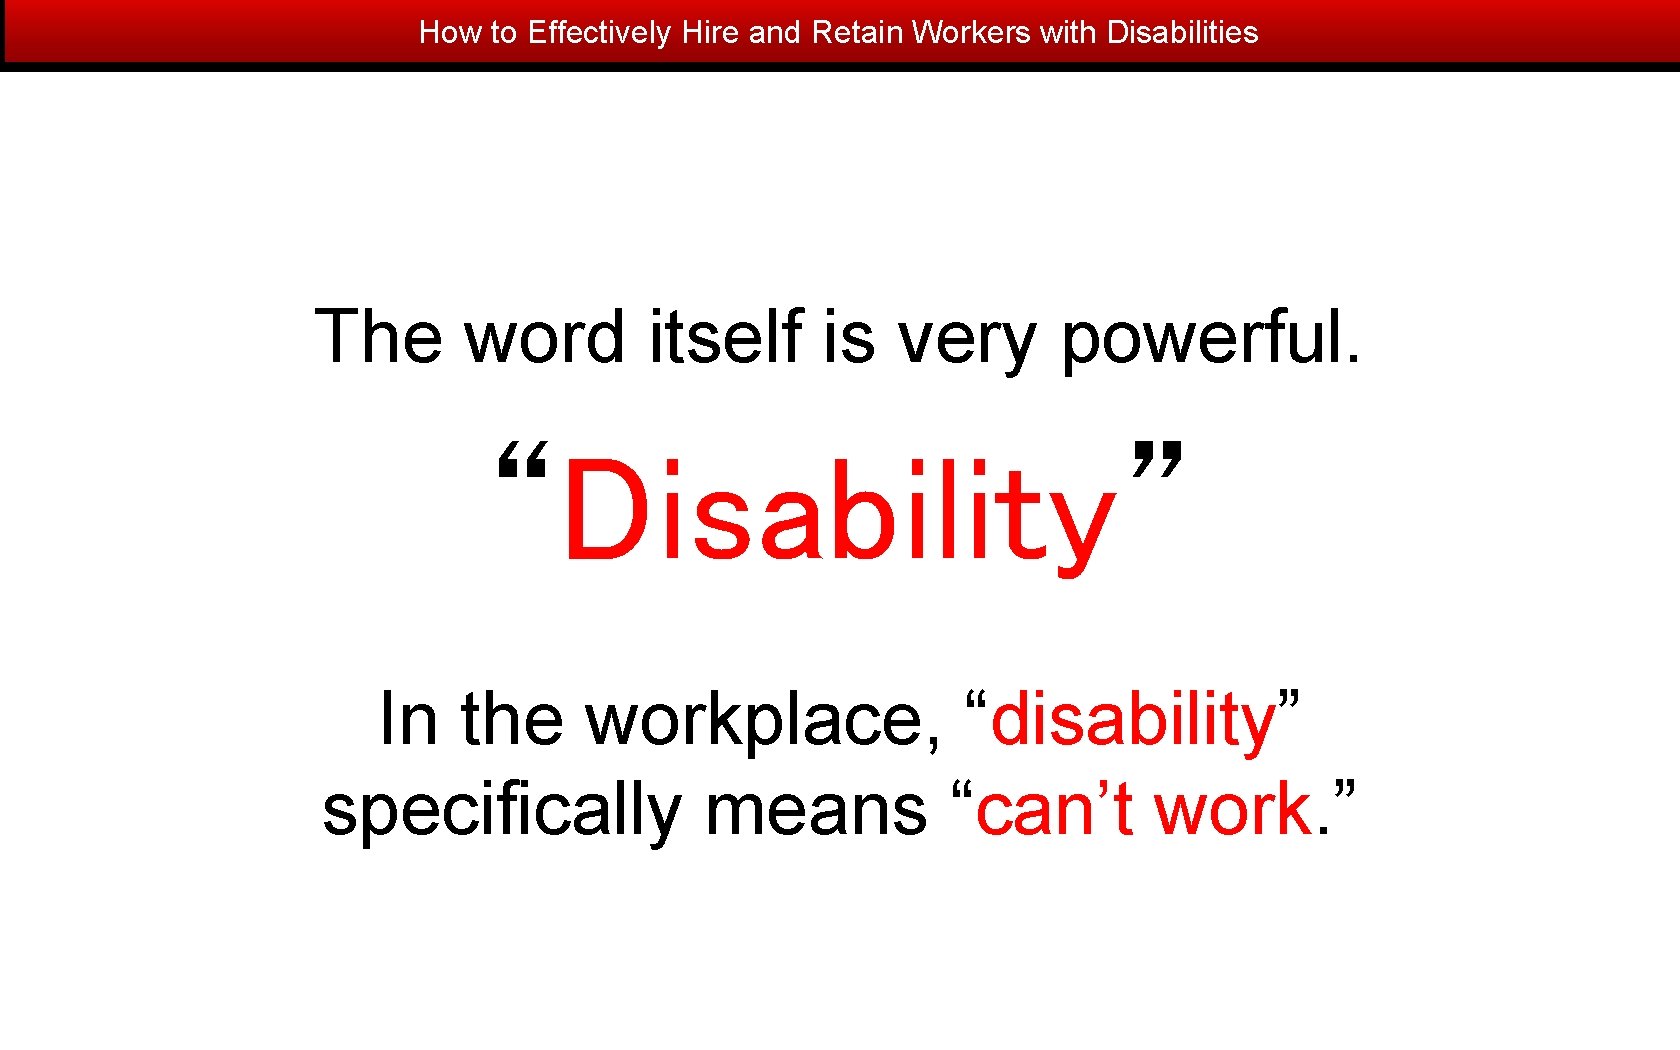 How to Effectively Hire and Retain Workers with Disabilities The word itself is very